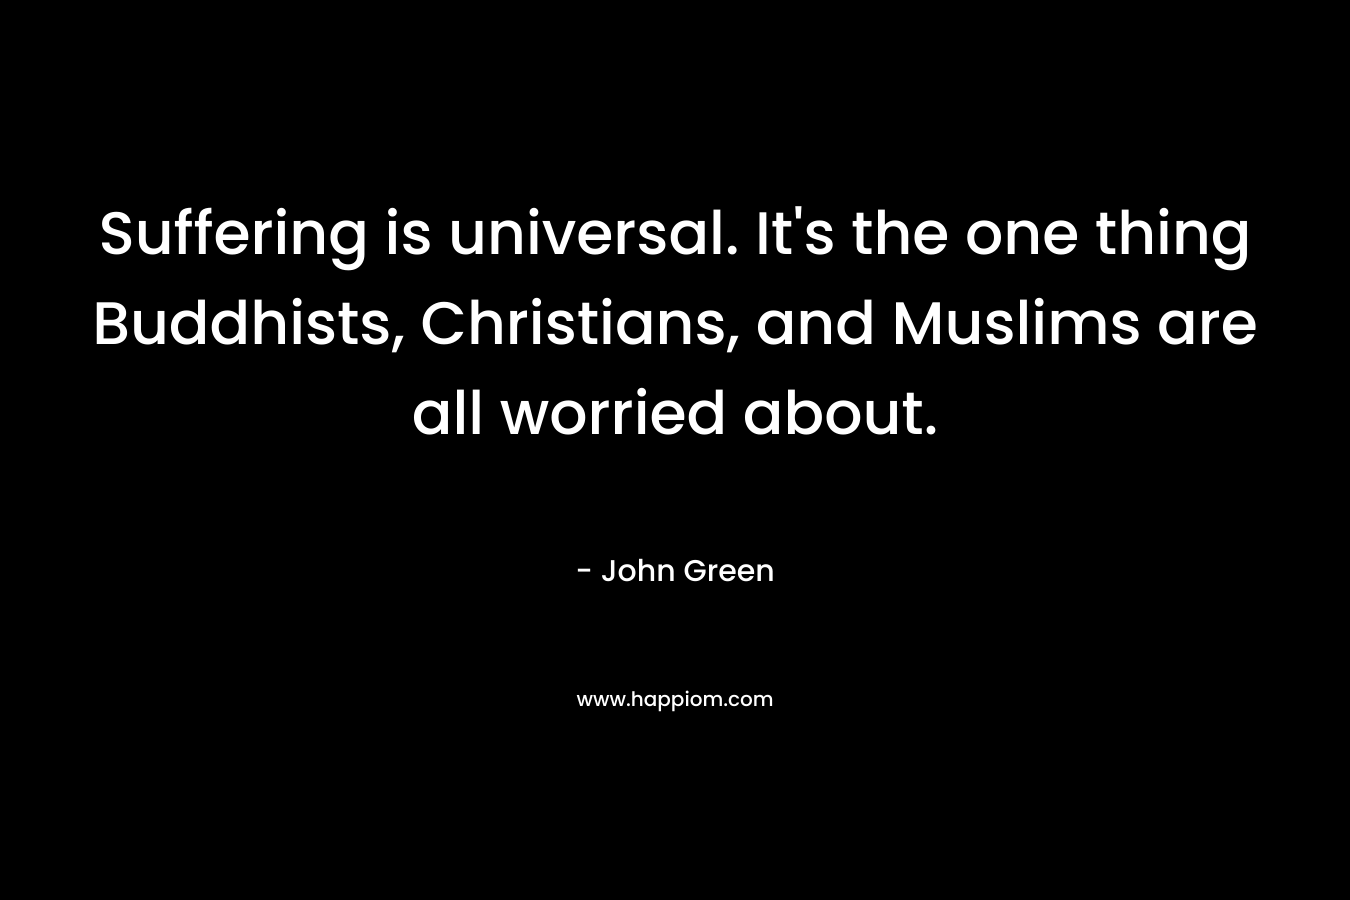 Suffering is universal. It's the one thing Buddhists, Christians, and Muslims are all worried about.